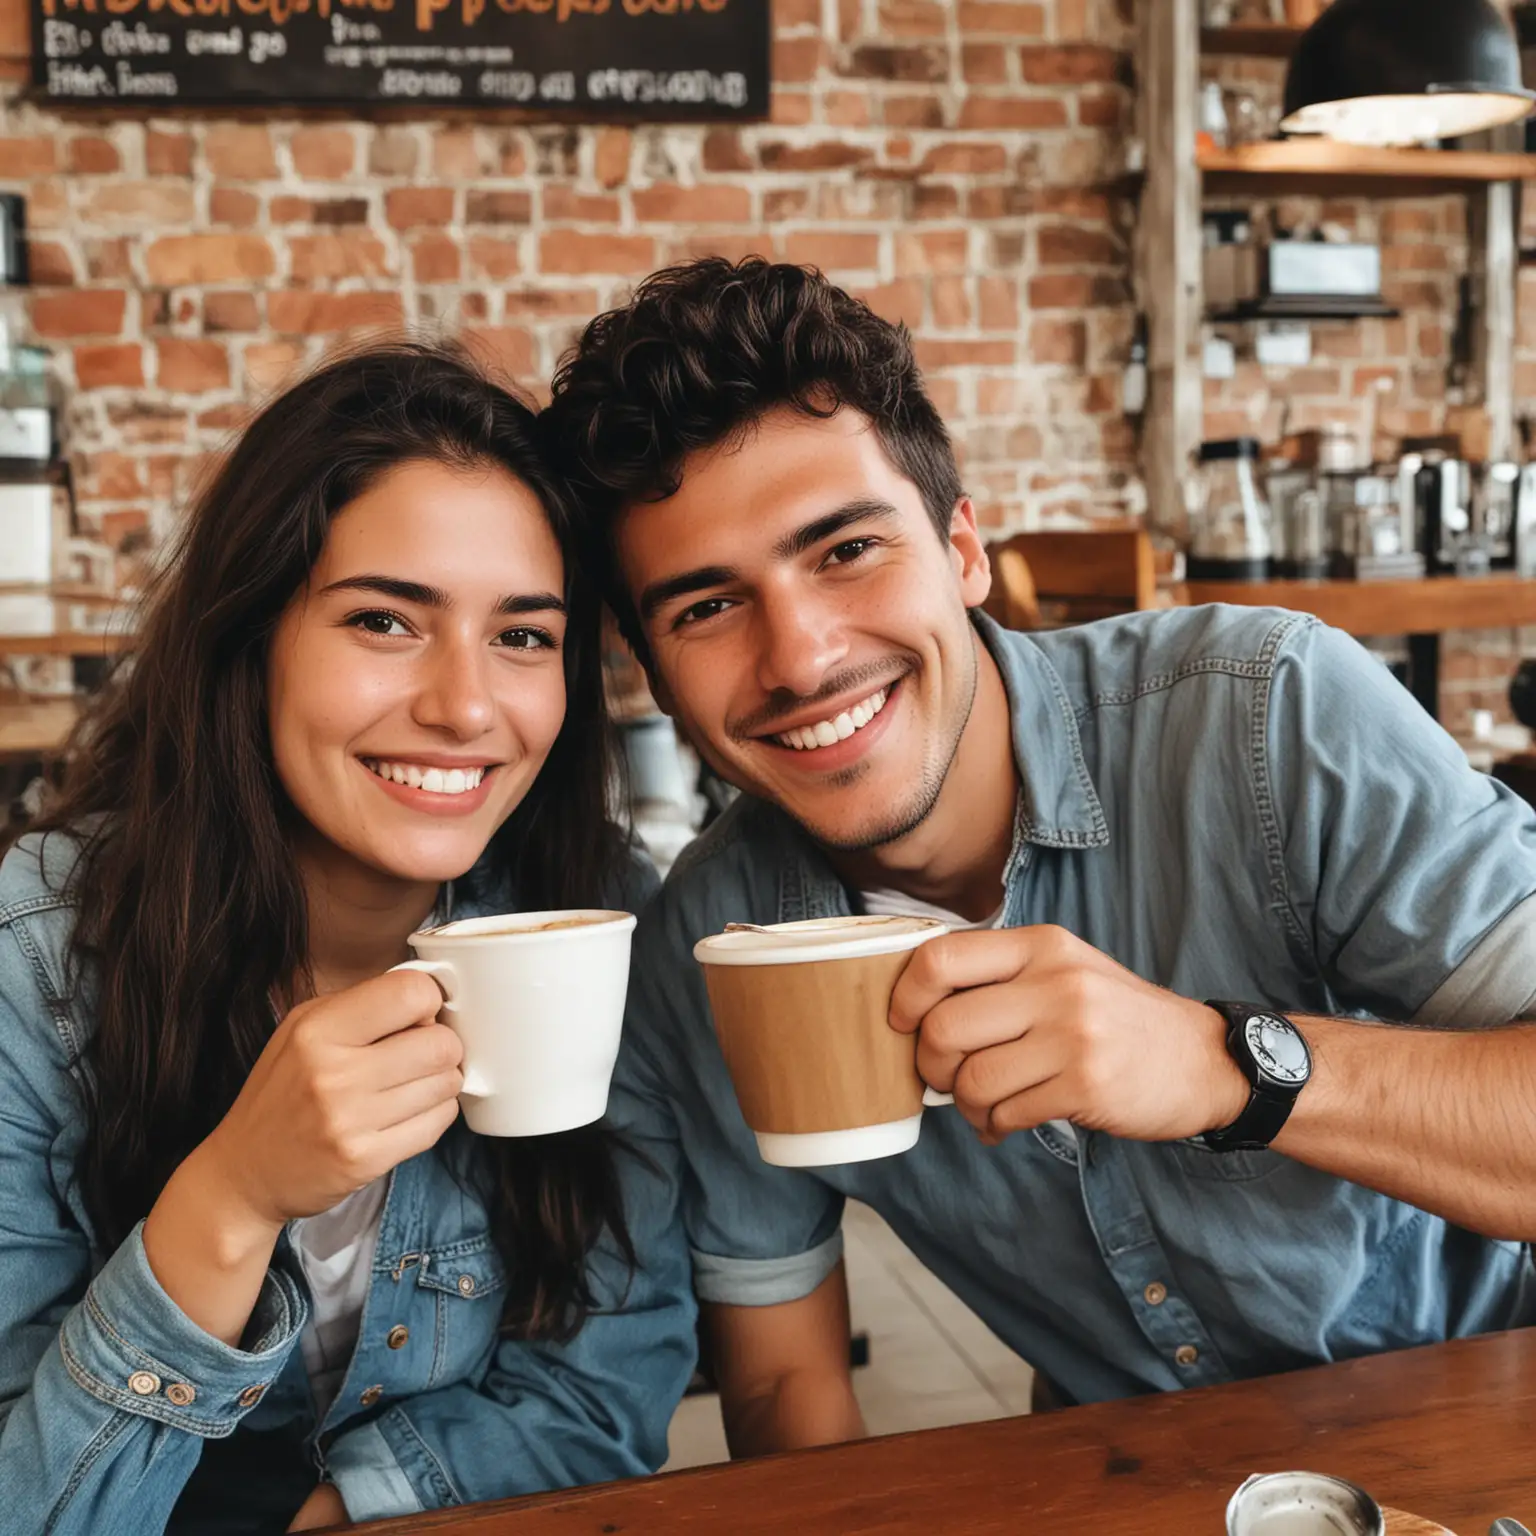 Smiling Friends Enjoying Colombian Coffee in a Cozy Caf Setting